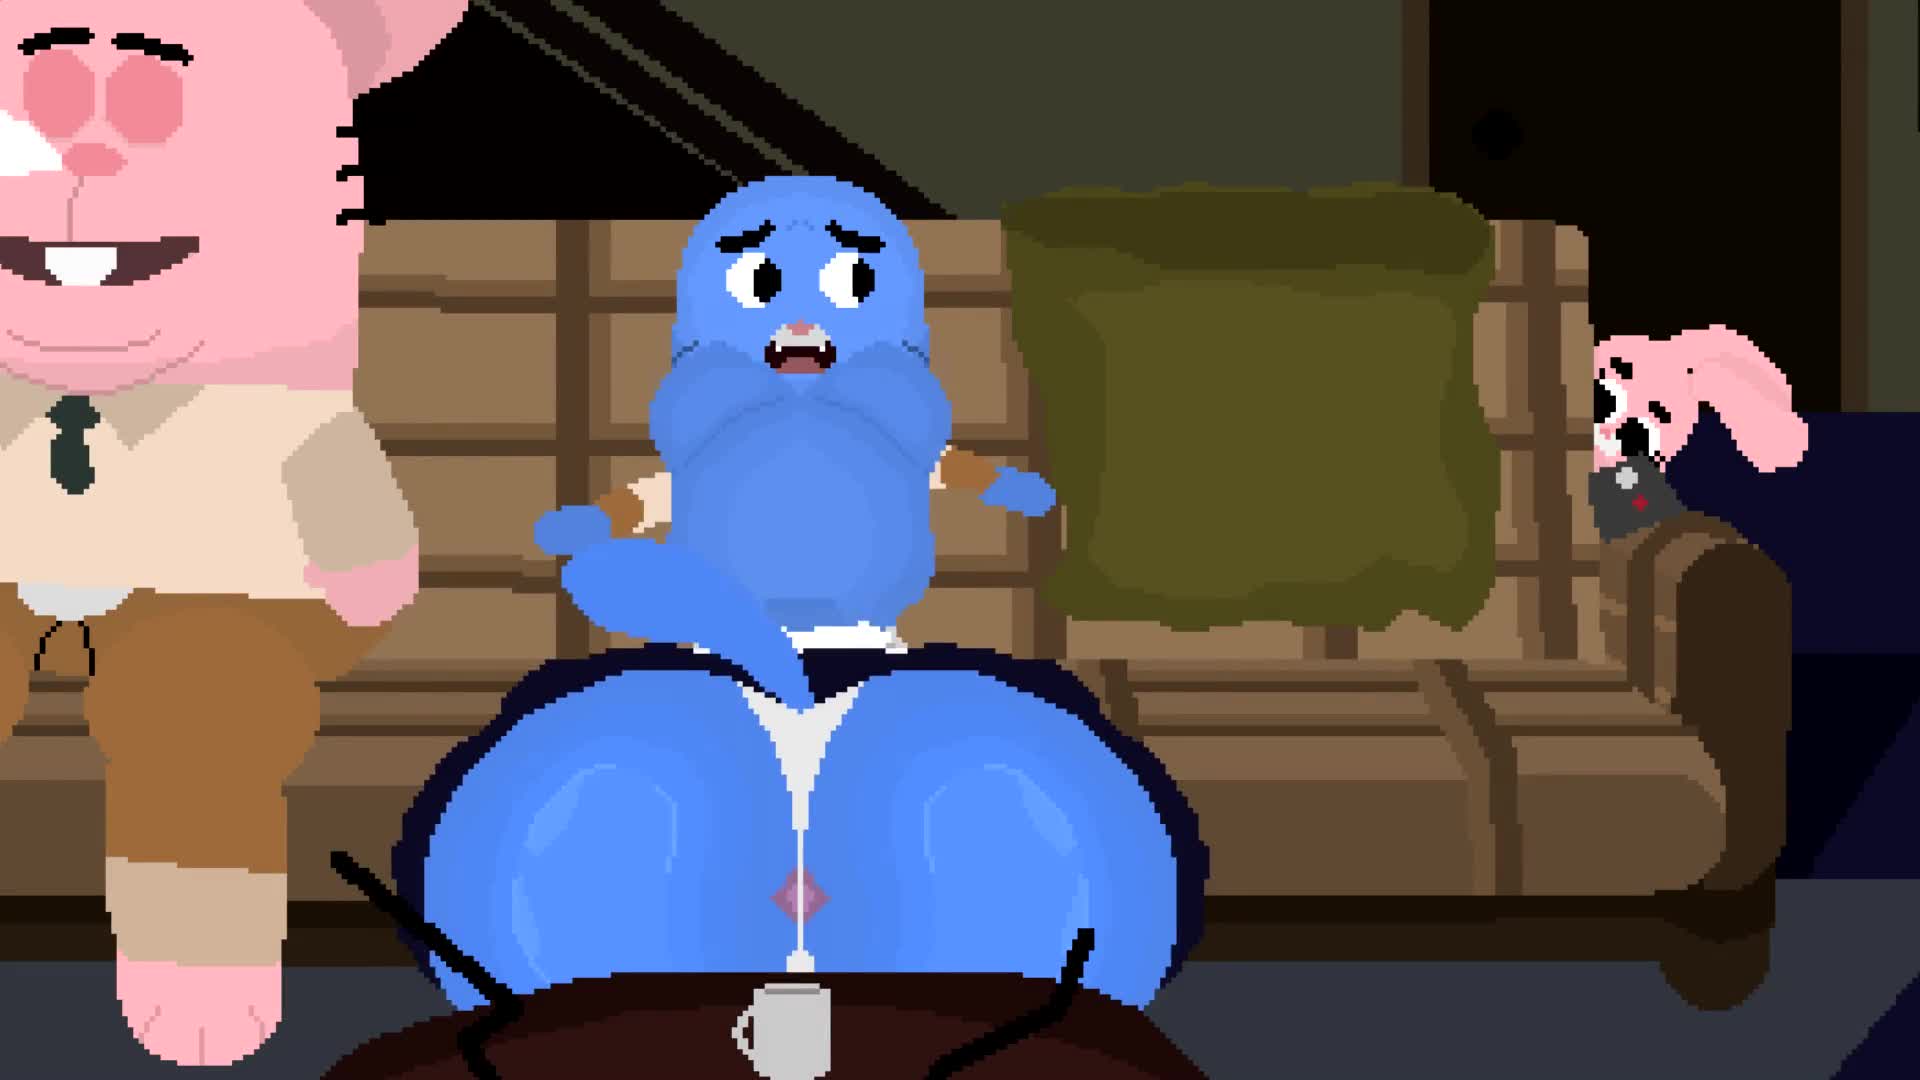 Amazing World Of Gumball Penny Porn Games - The Amazing World Of Gumball Adult Porn Games - Lewd Ninja